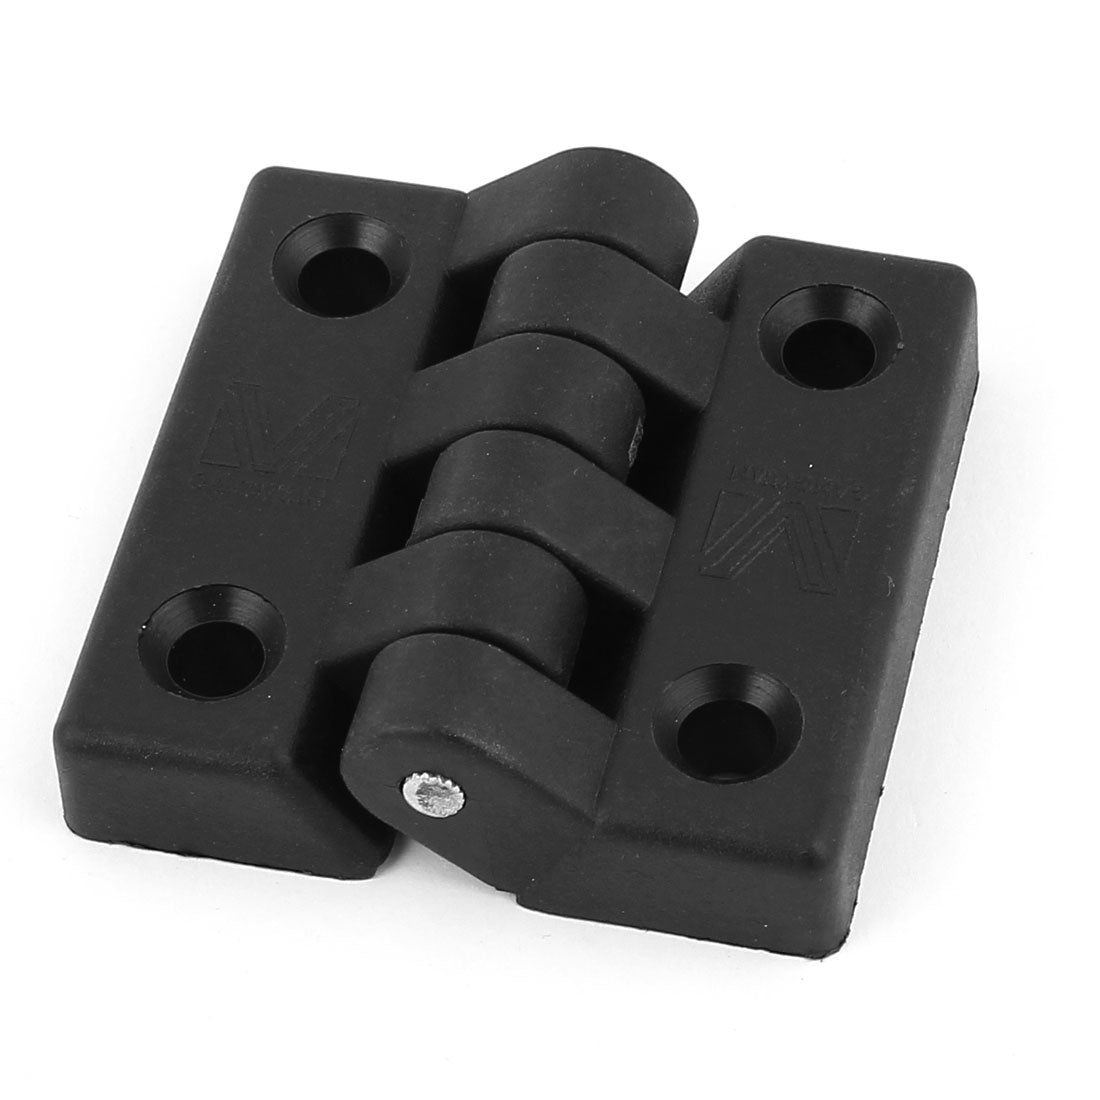 uxcell Uxcell Black Plastic Foldable Cabinet Cupboard Gate Door Flap Ball Bearing Hinge